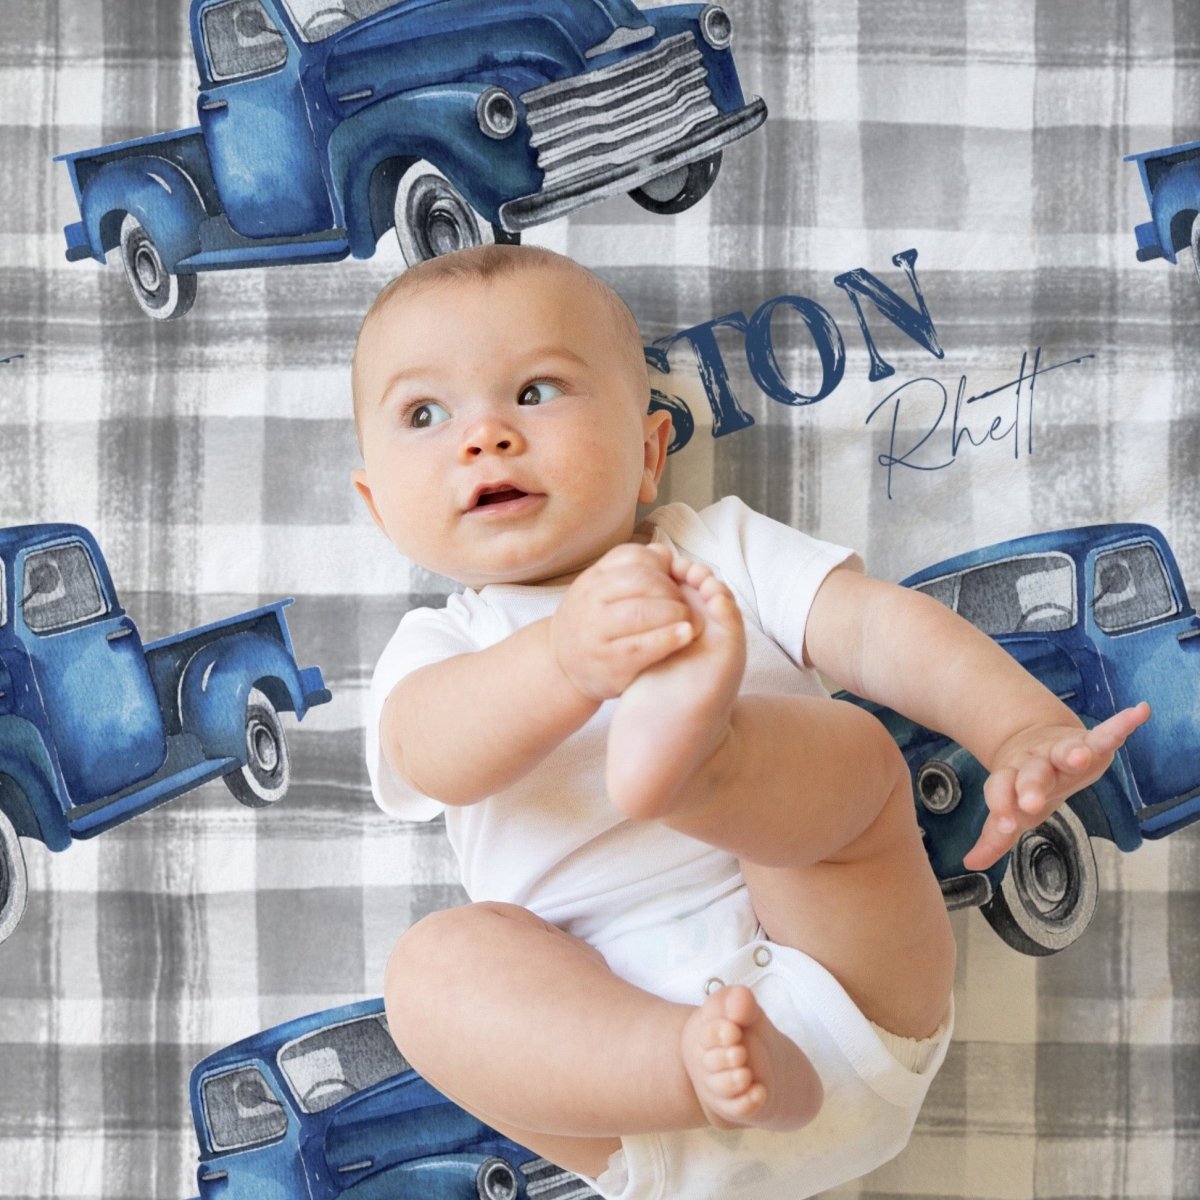 Vintage Truck Personalized Baby Blanket - gender_boy, Personalized_Yes, text